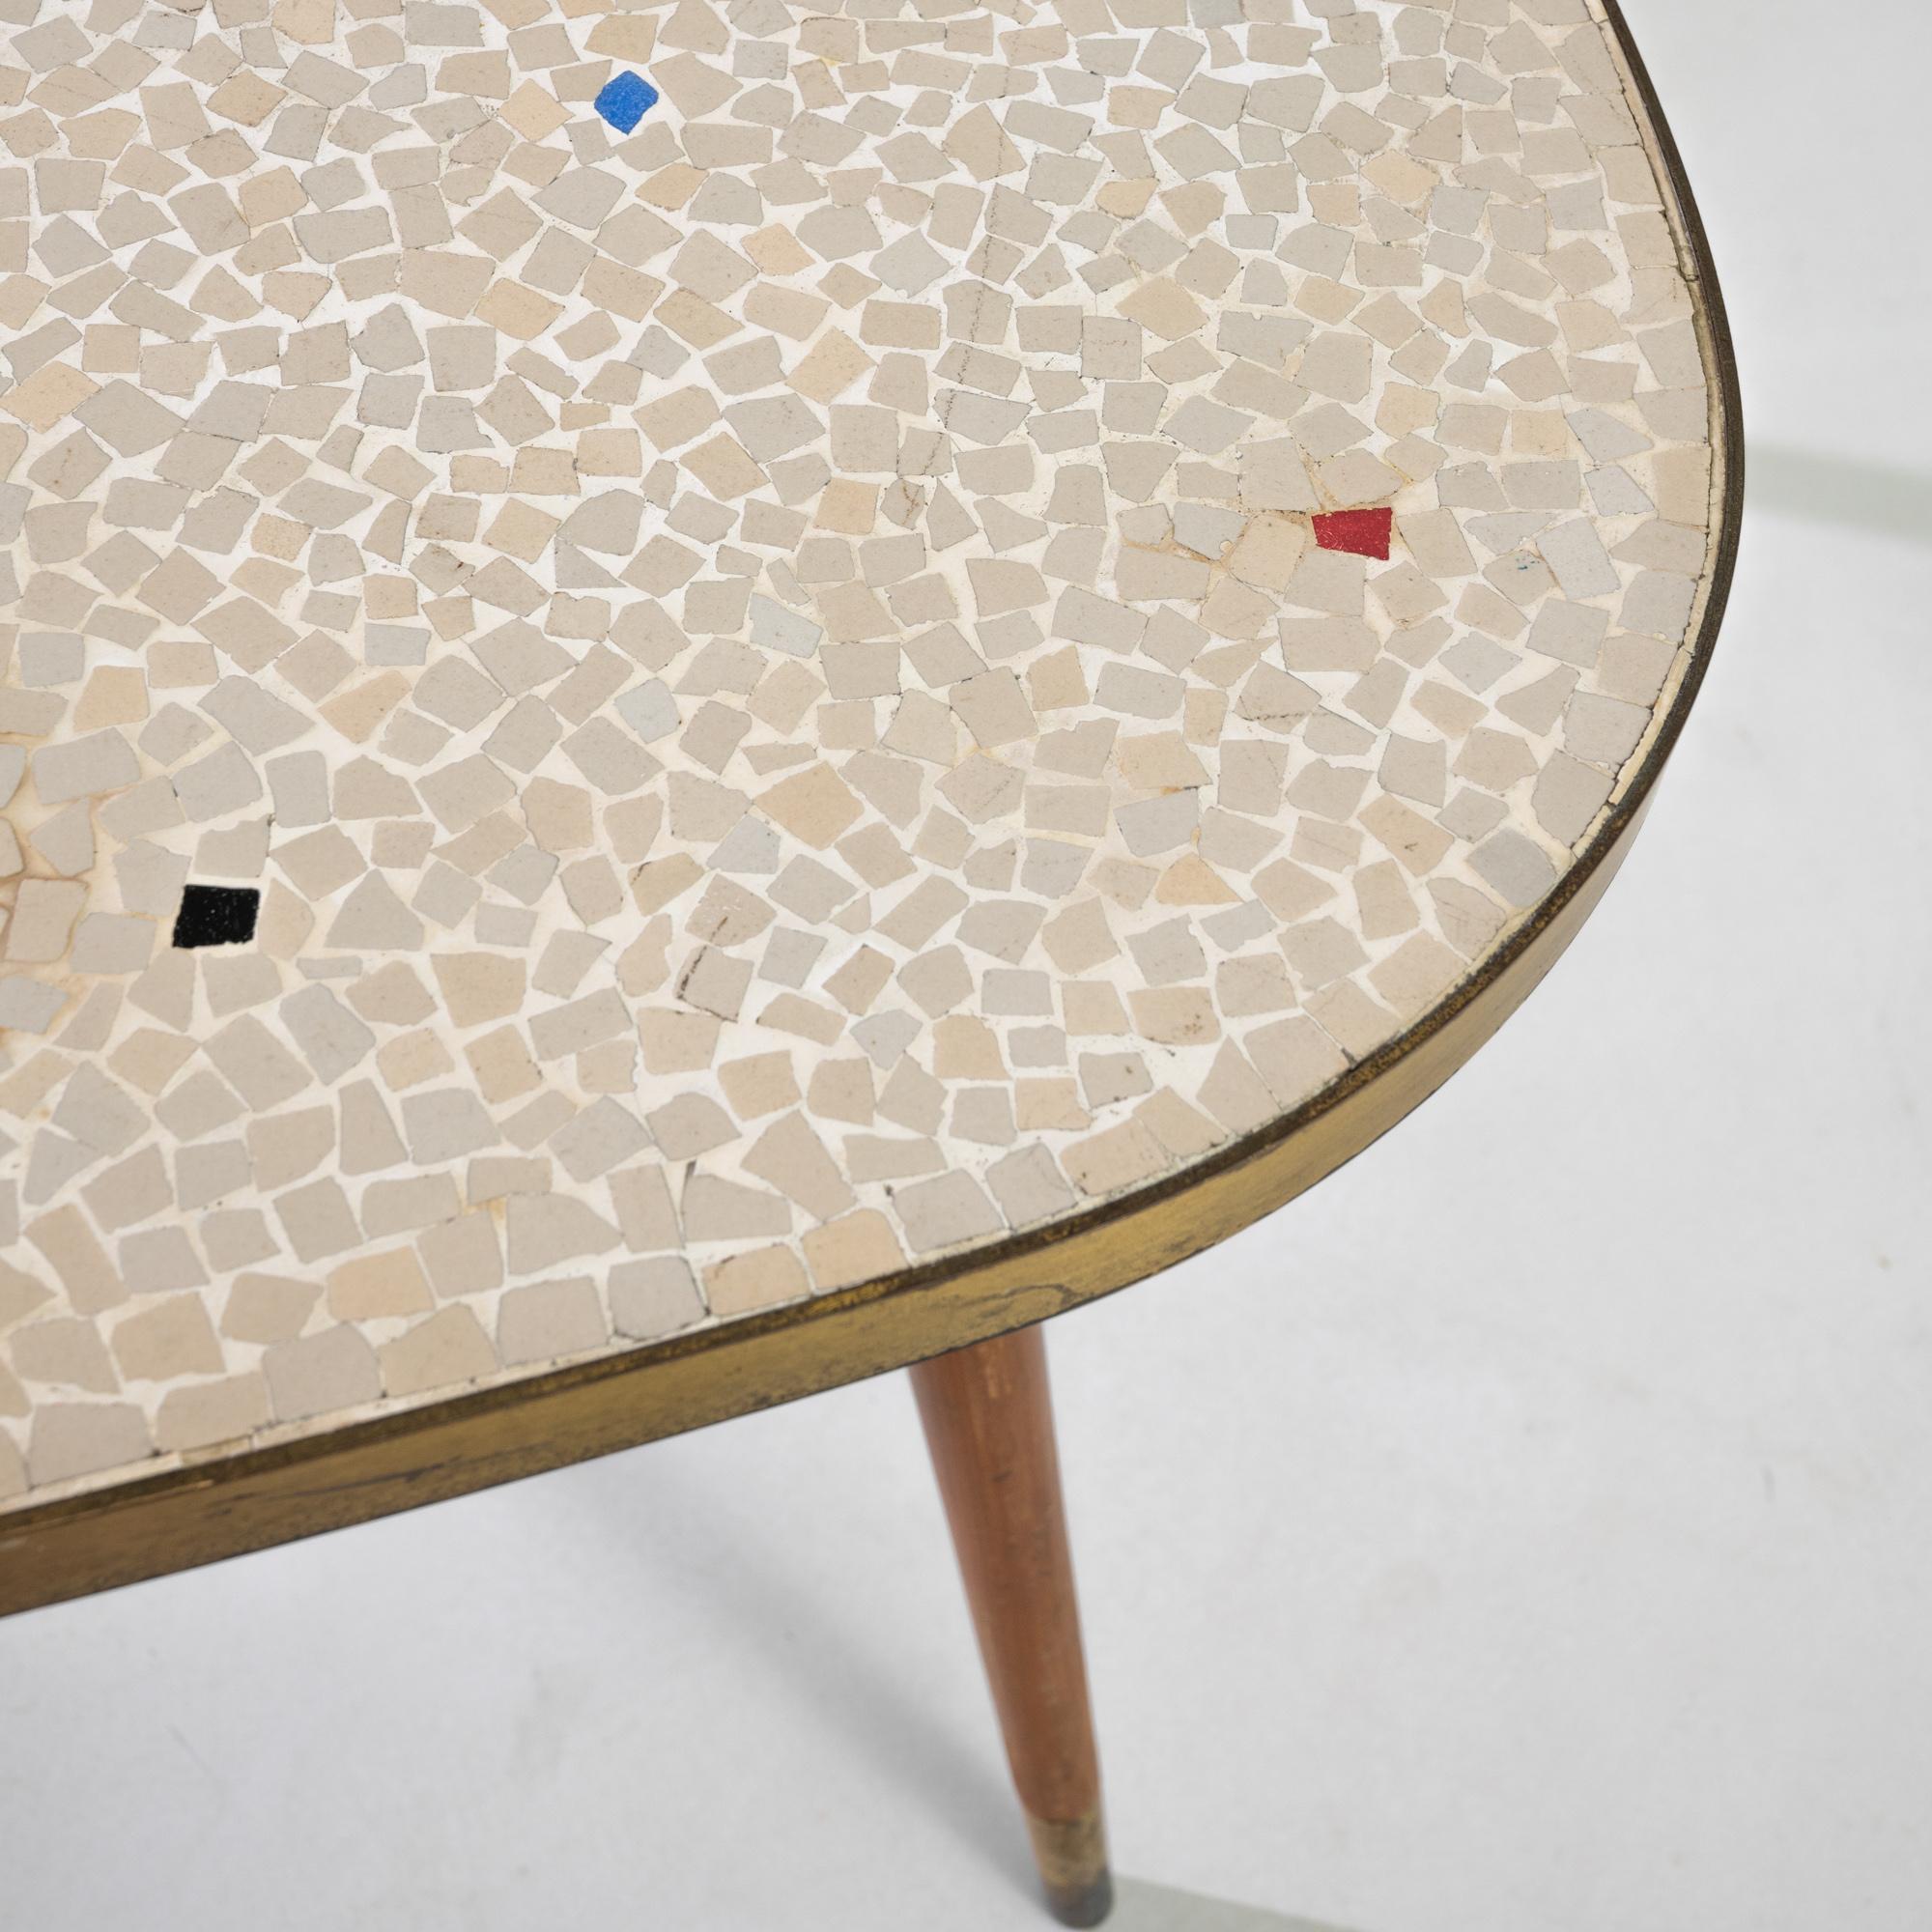 Joyful and idiosyncratic, this wooden coffee table illustrates the playful side of Scandinavian Modernism. Made in Denmark in the 1960s, an ovoid mosaic tabletop sits atop a trio of tapered wooden legs. The cream tiles of the mosaic are punctuated